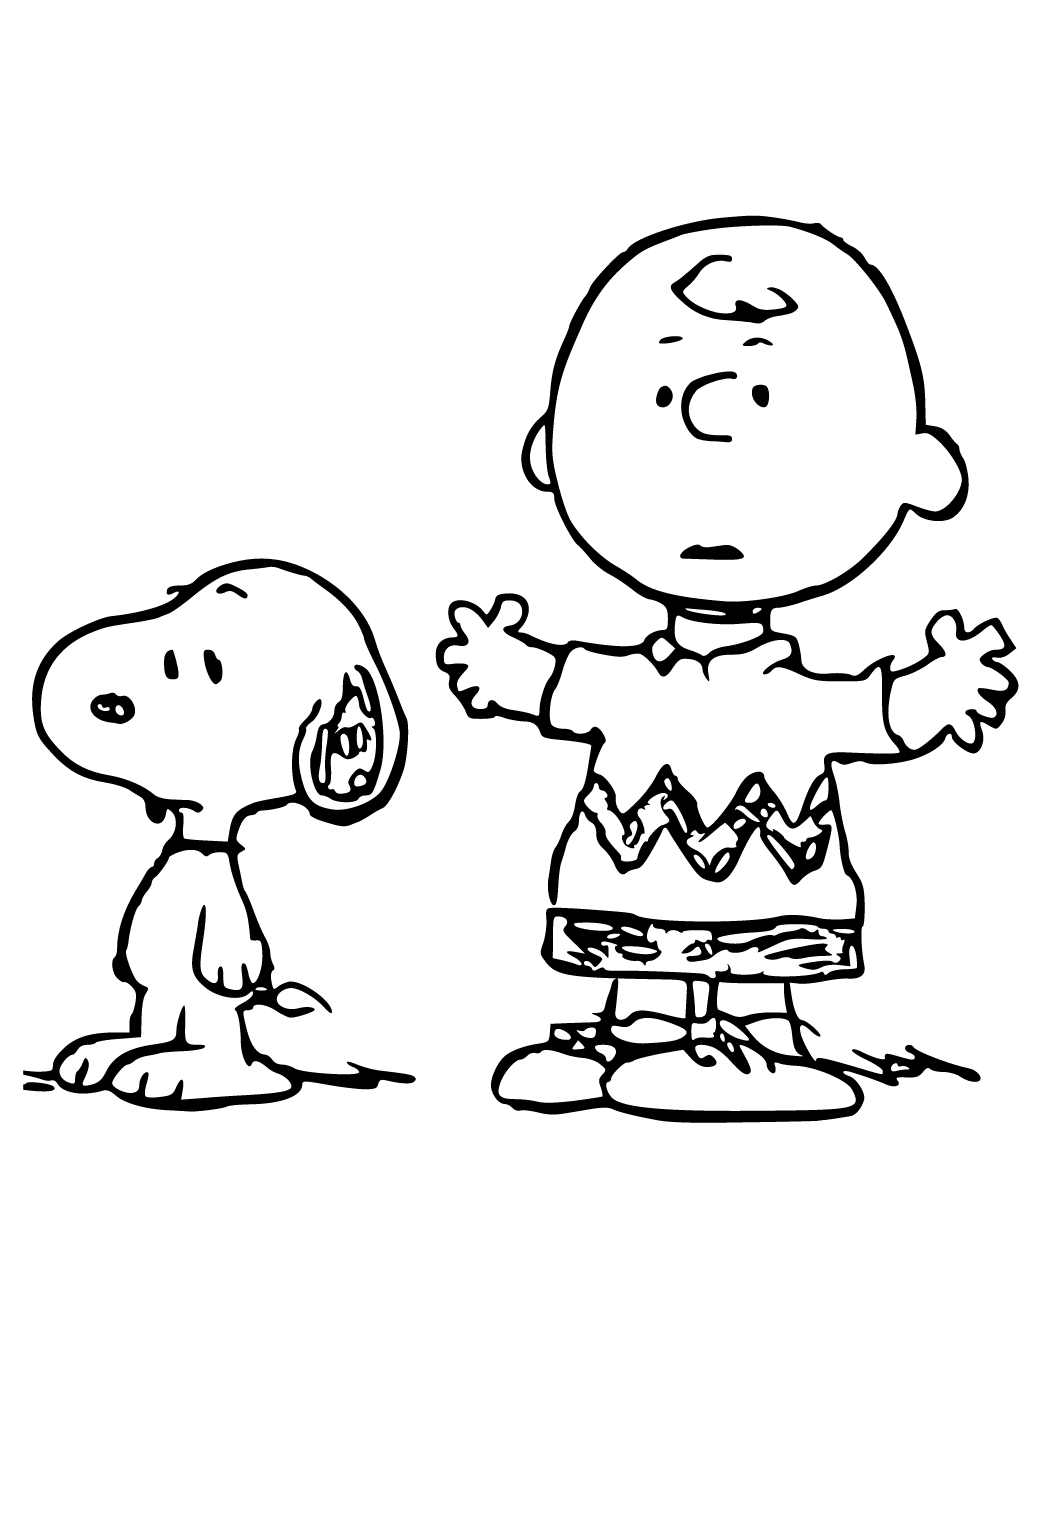 free-printable-snoopy-friends-coloring-page-for-adults-and-kids